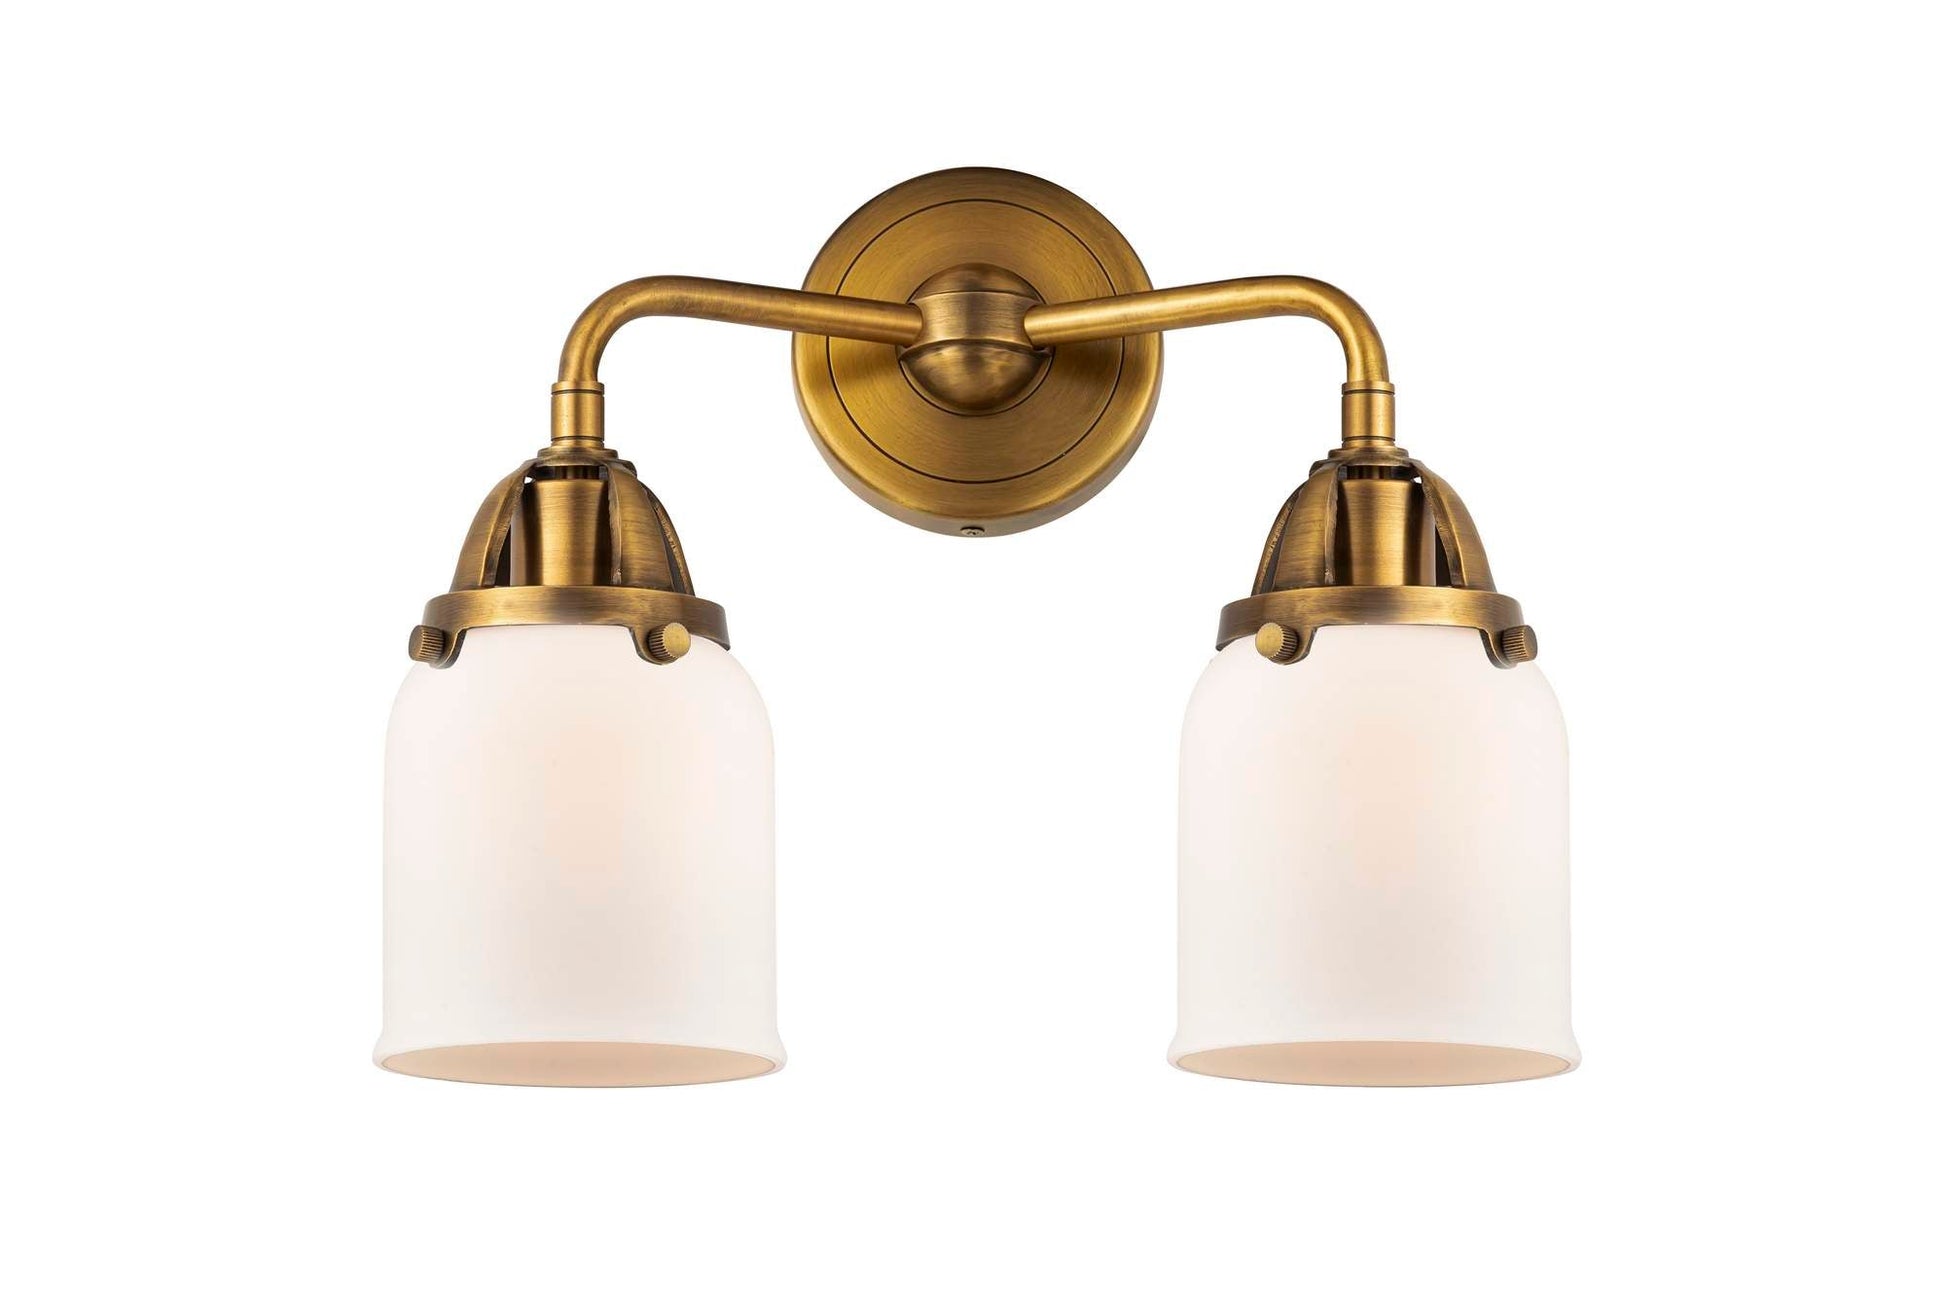 288-2W-BB-G51 2-Light 13" Brushed Brass Bath Vanity Light - Matte White Cased Small Bell Glass - LED Bulb - Dimmensions: 13 x 6.75 x 12.125 - Glass Up or Down: Yes